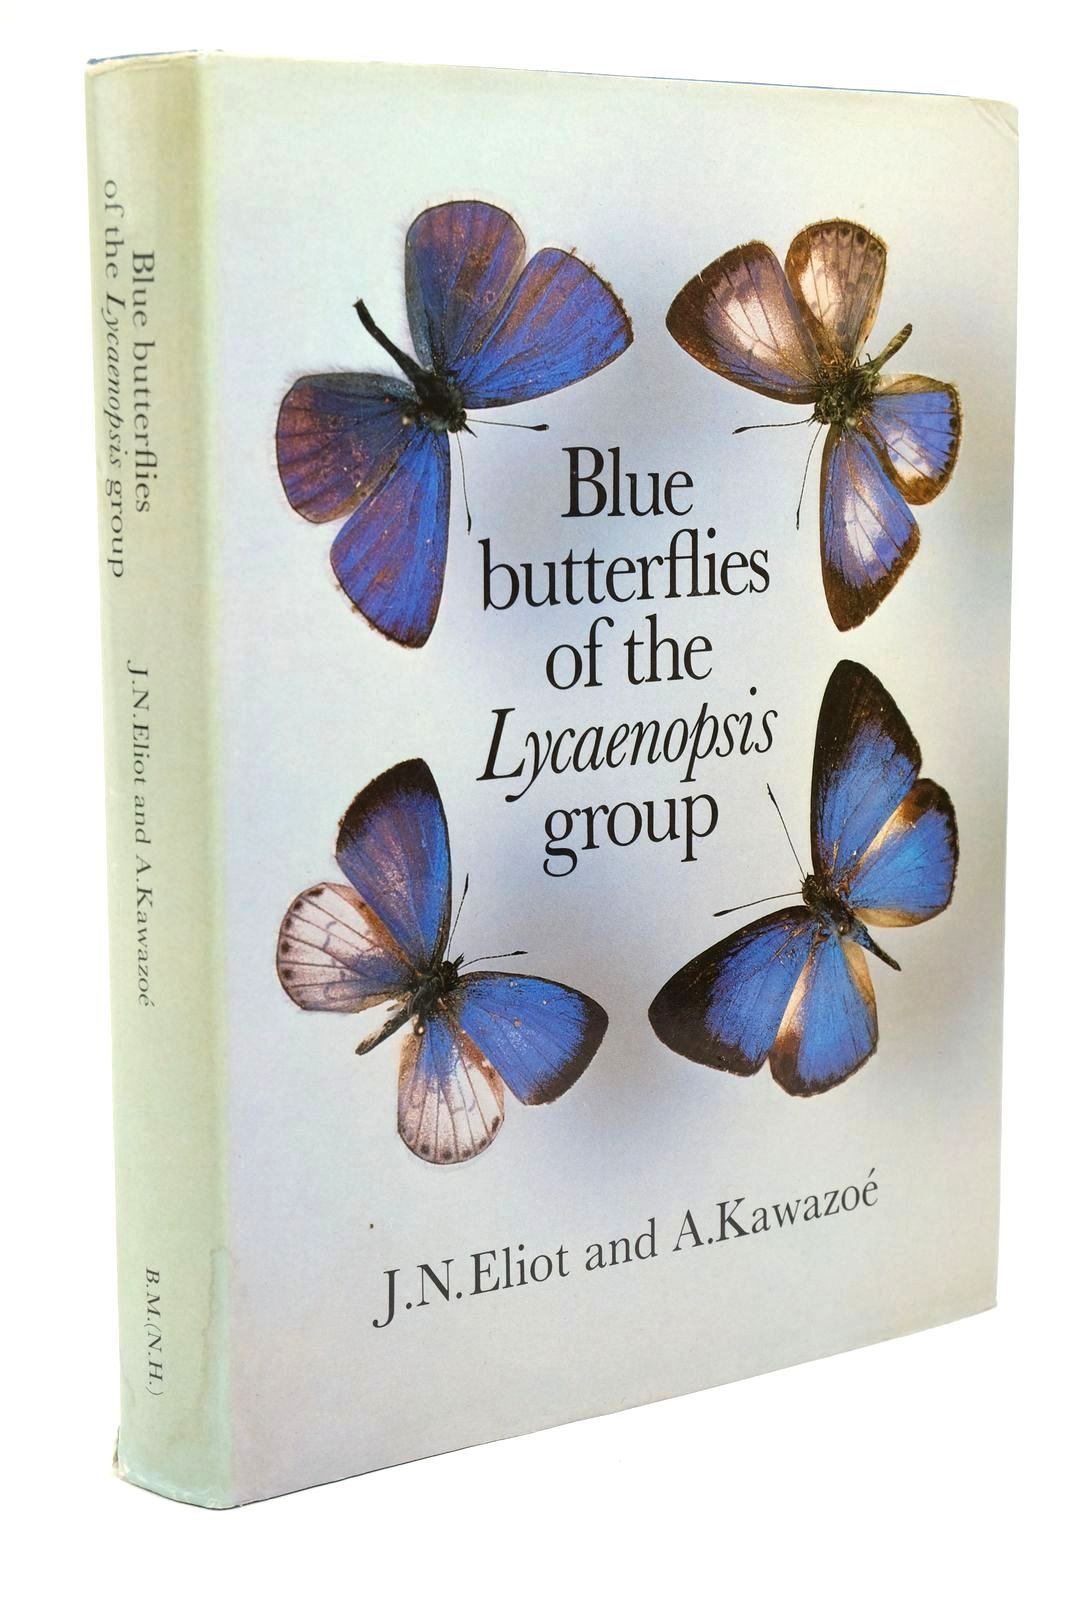 Photo of BLUE BUTTERFLIES OF THE LYCAENOPSIS GROUP written by Eliot, J.N. Kawazoe, A. published by British Museum (Natural History) (STOCK CODE: 1323094)  for sale by Stella & Rose's Books